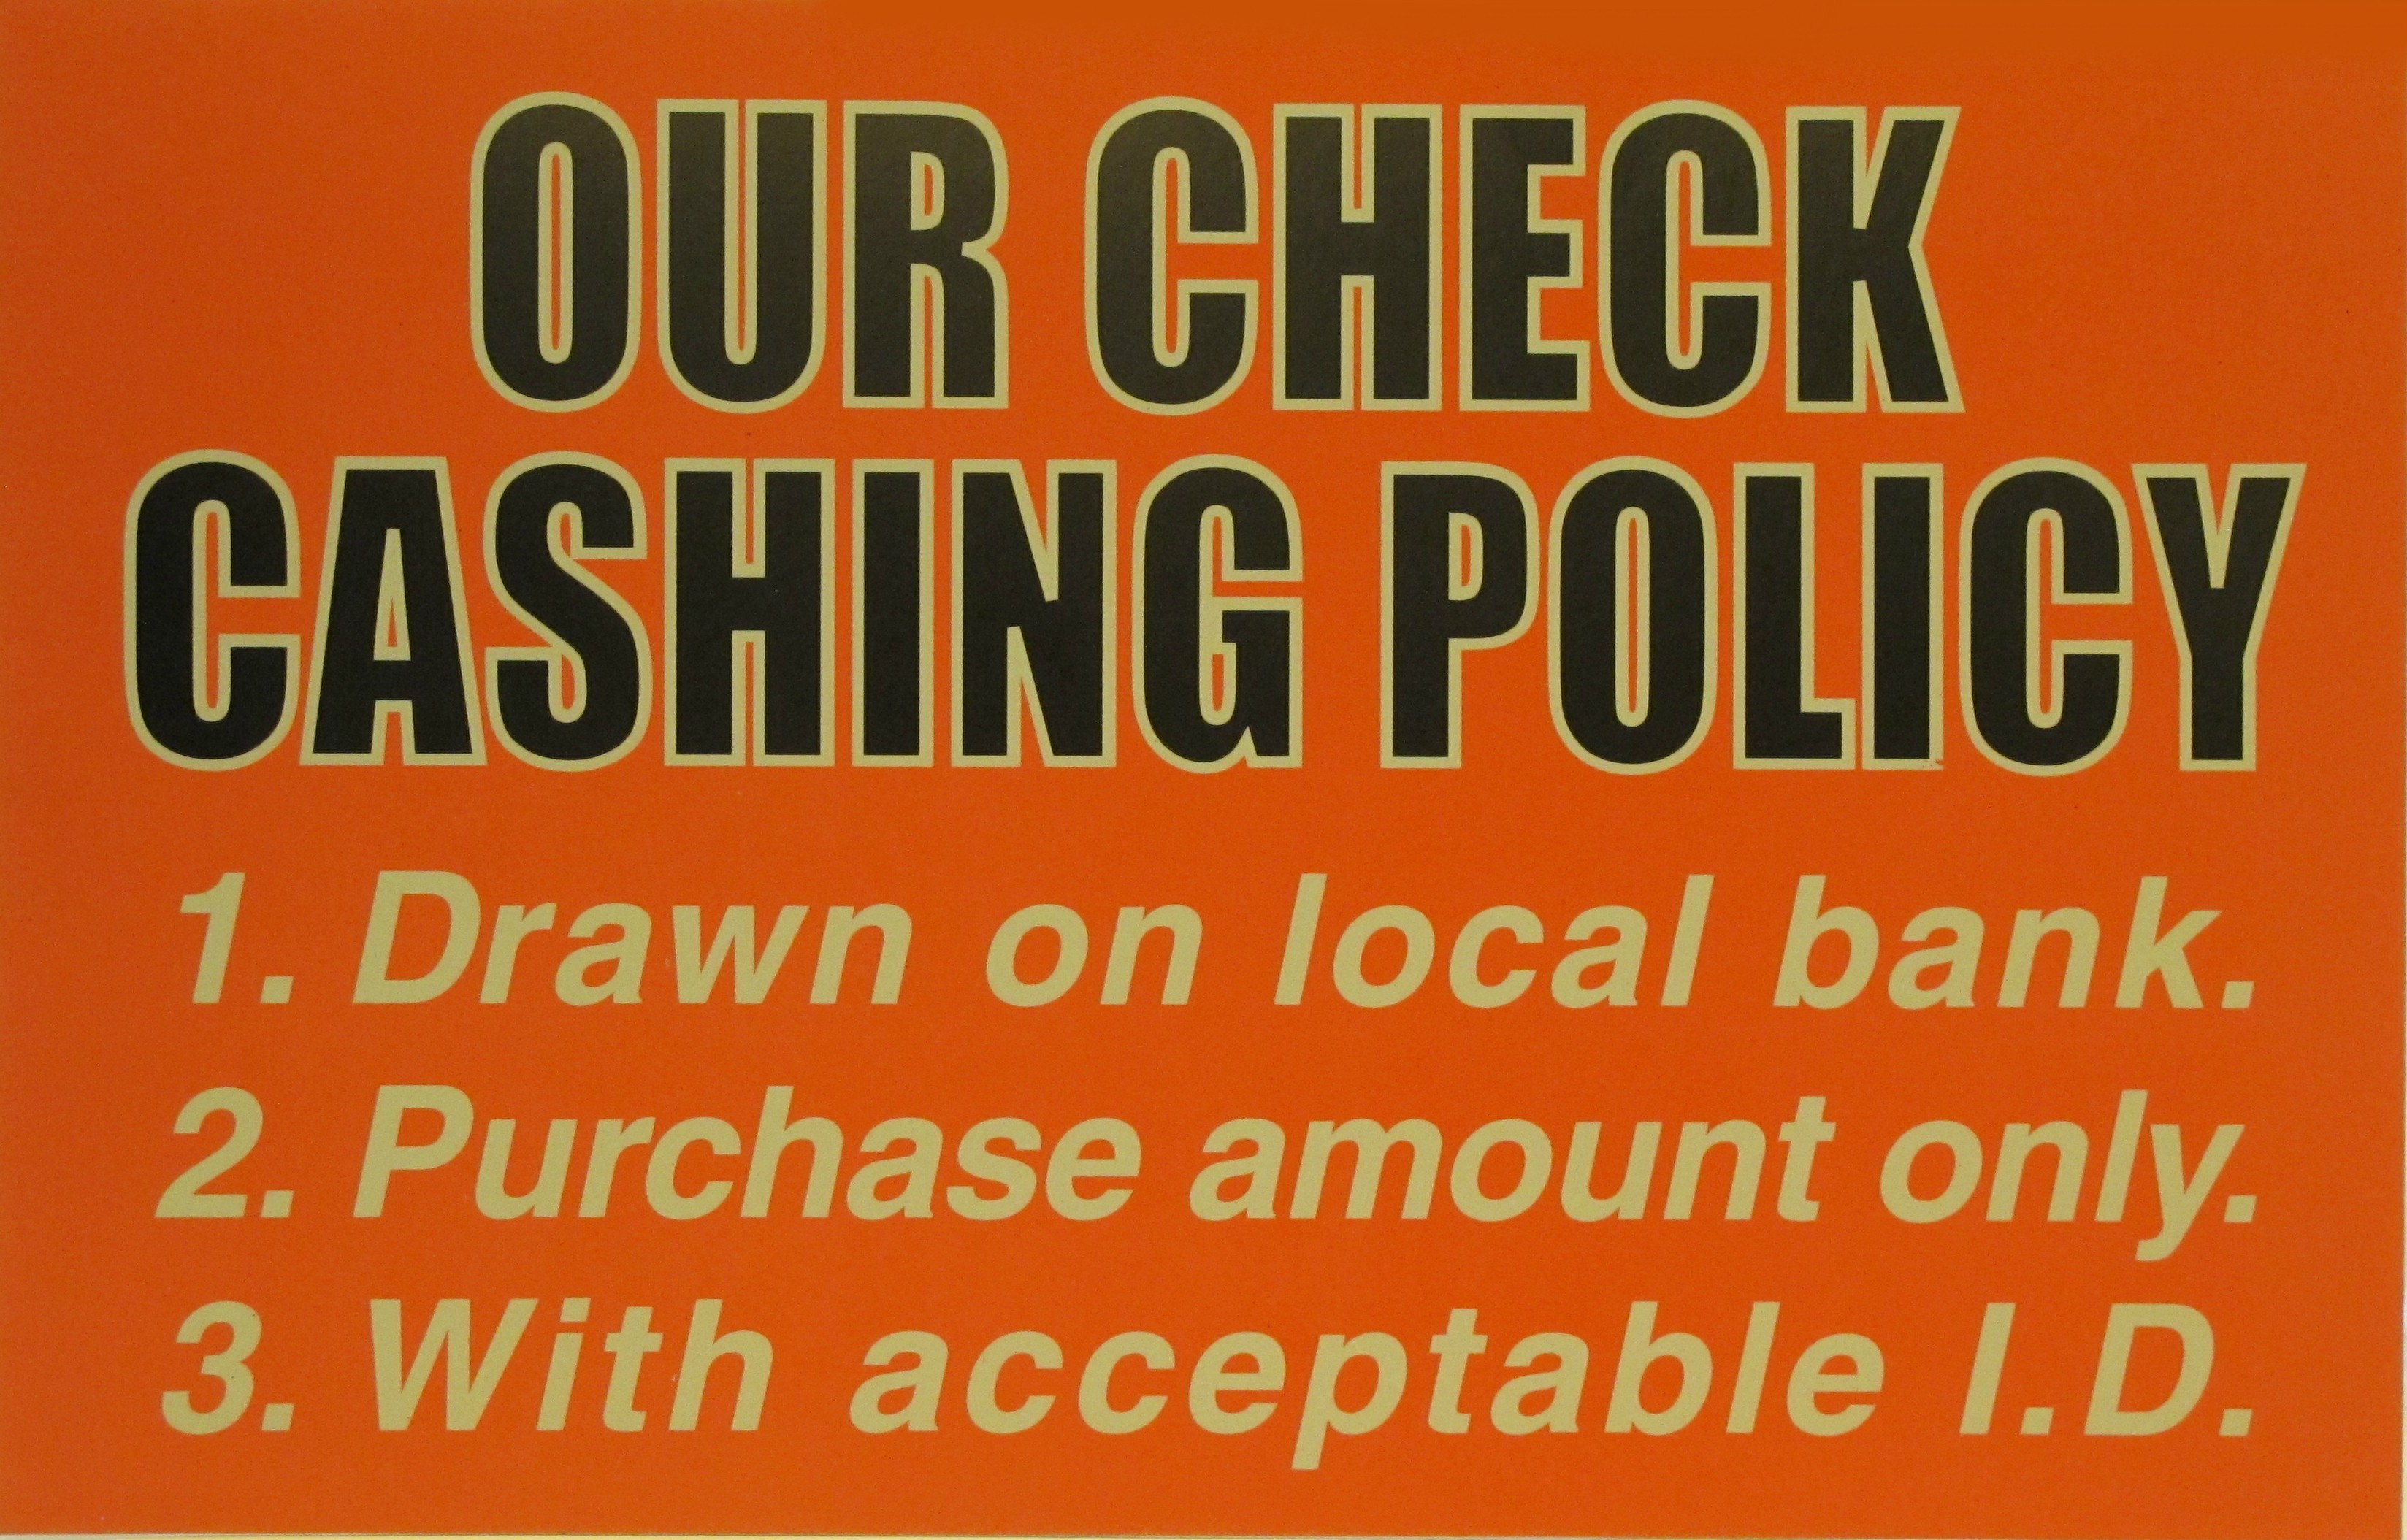 Our Check Cashing Policy Sign